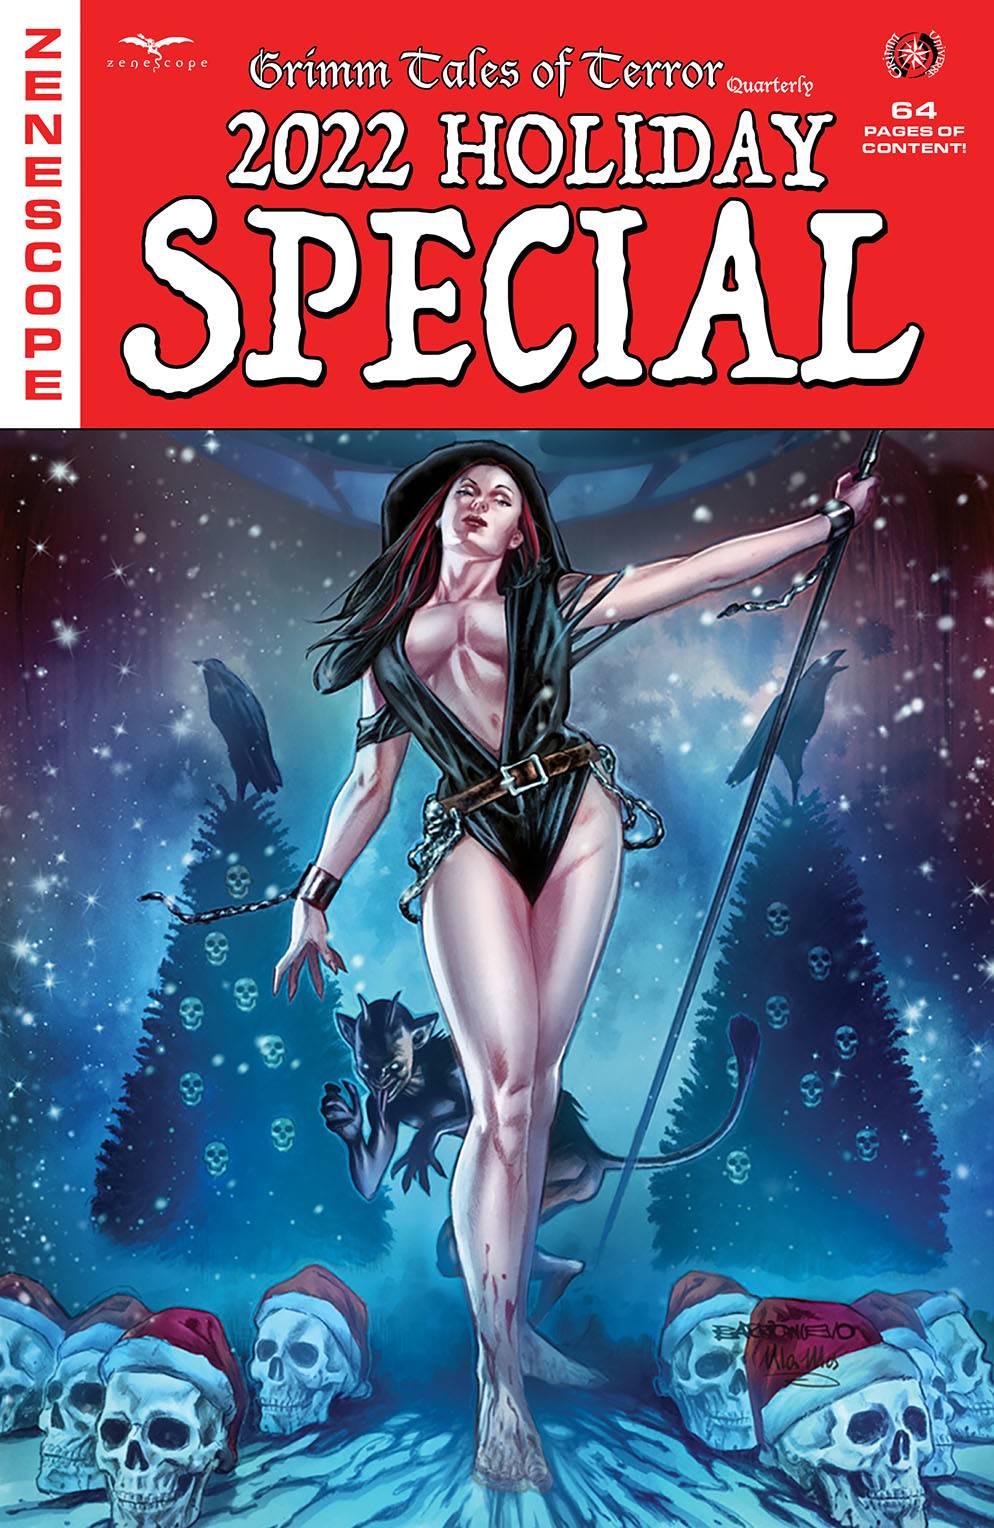 TALES OF TERROR QUARTERLY 2022 HOLIDAY SPECIAL CVR A BARRION